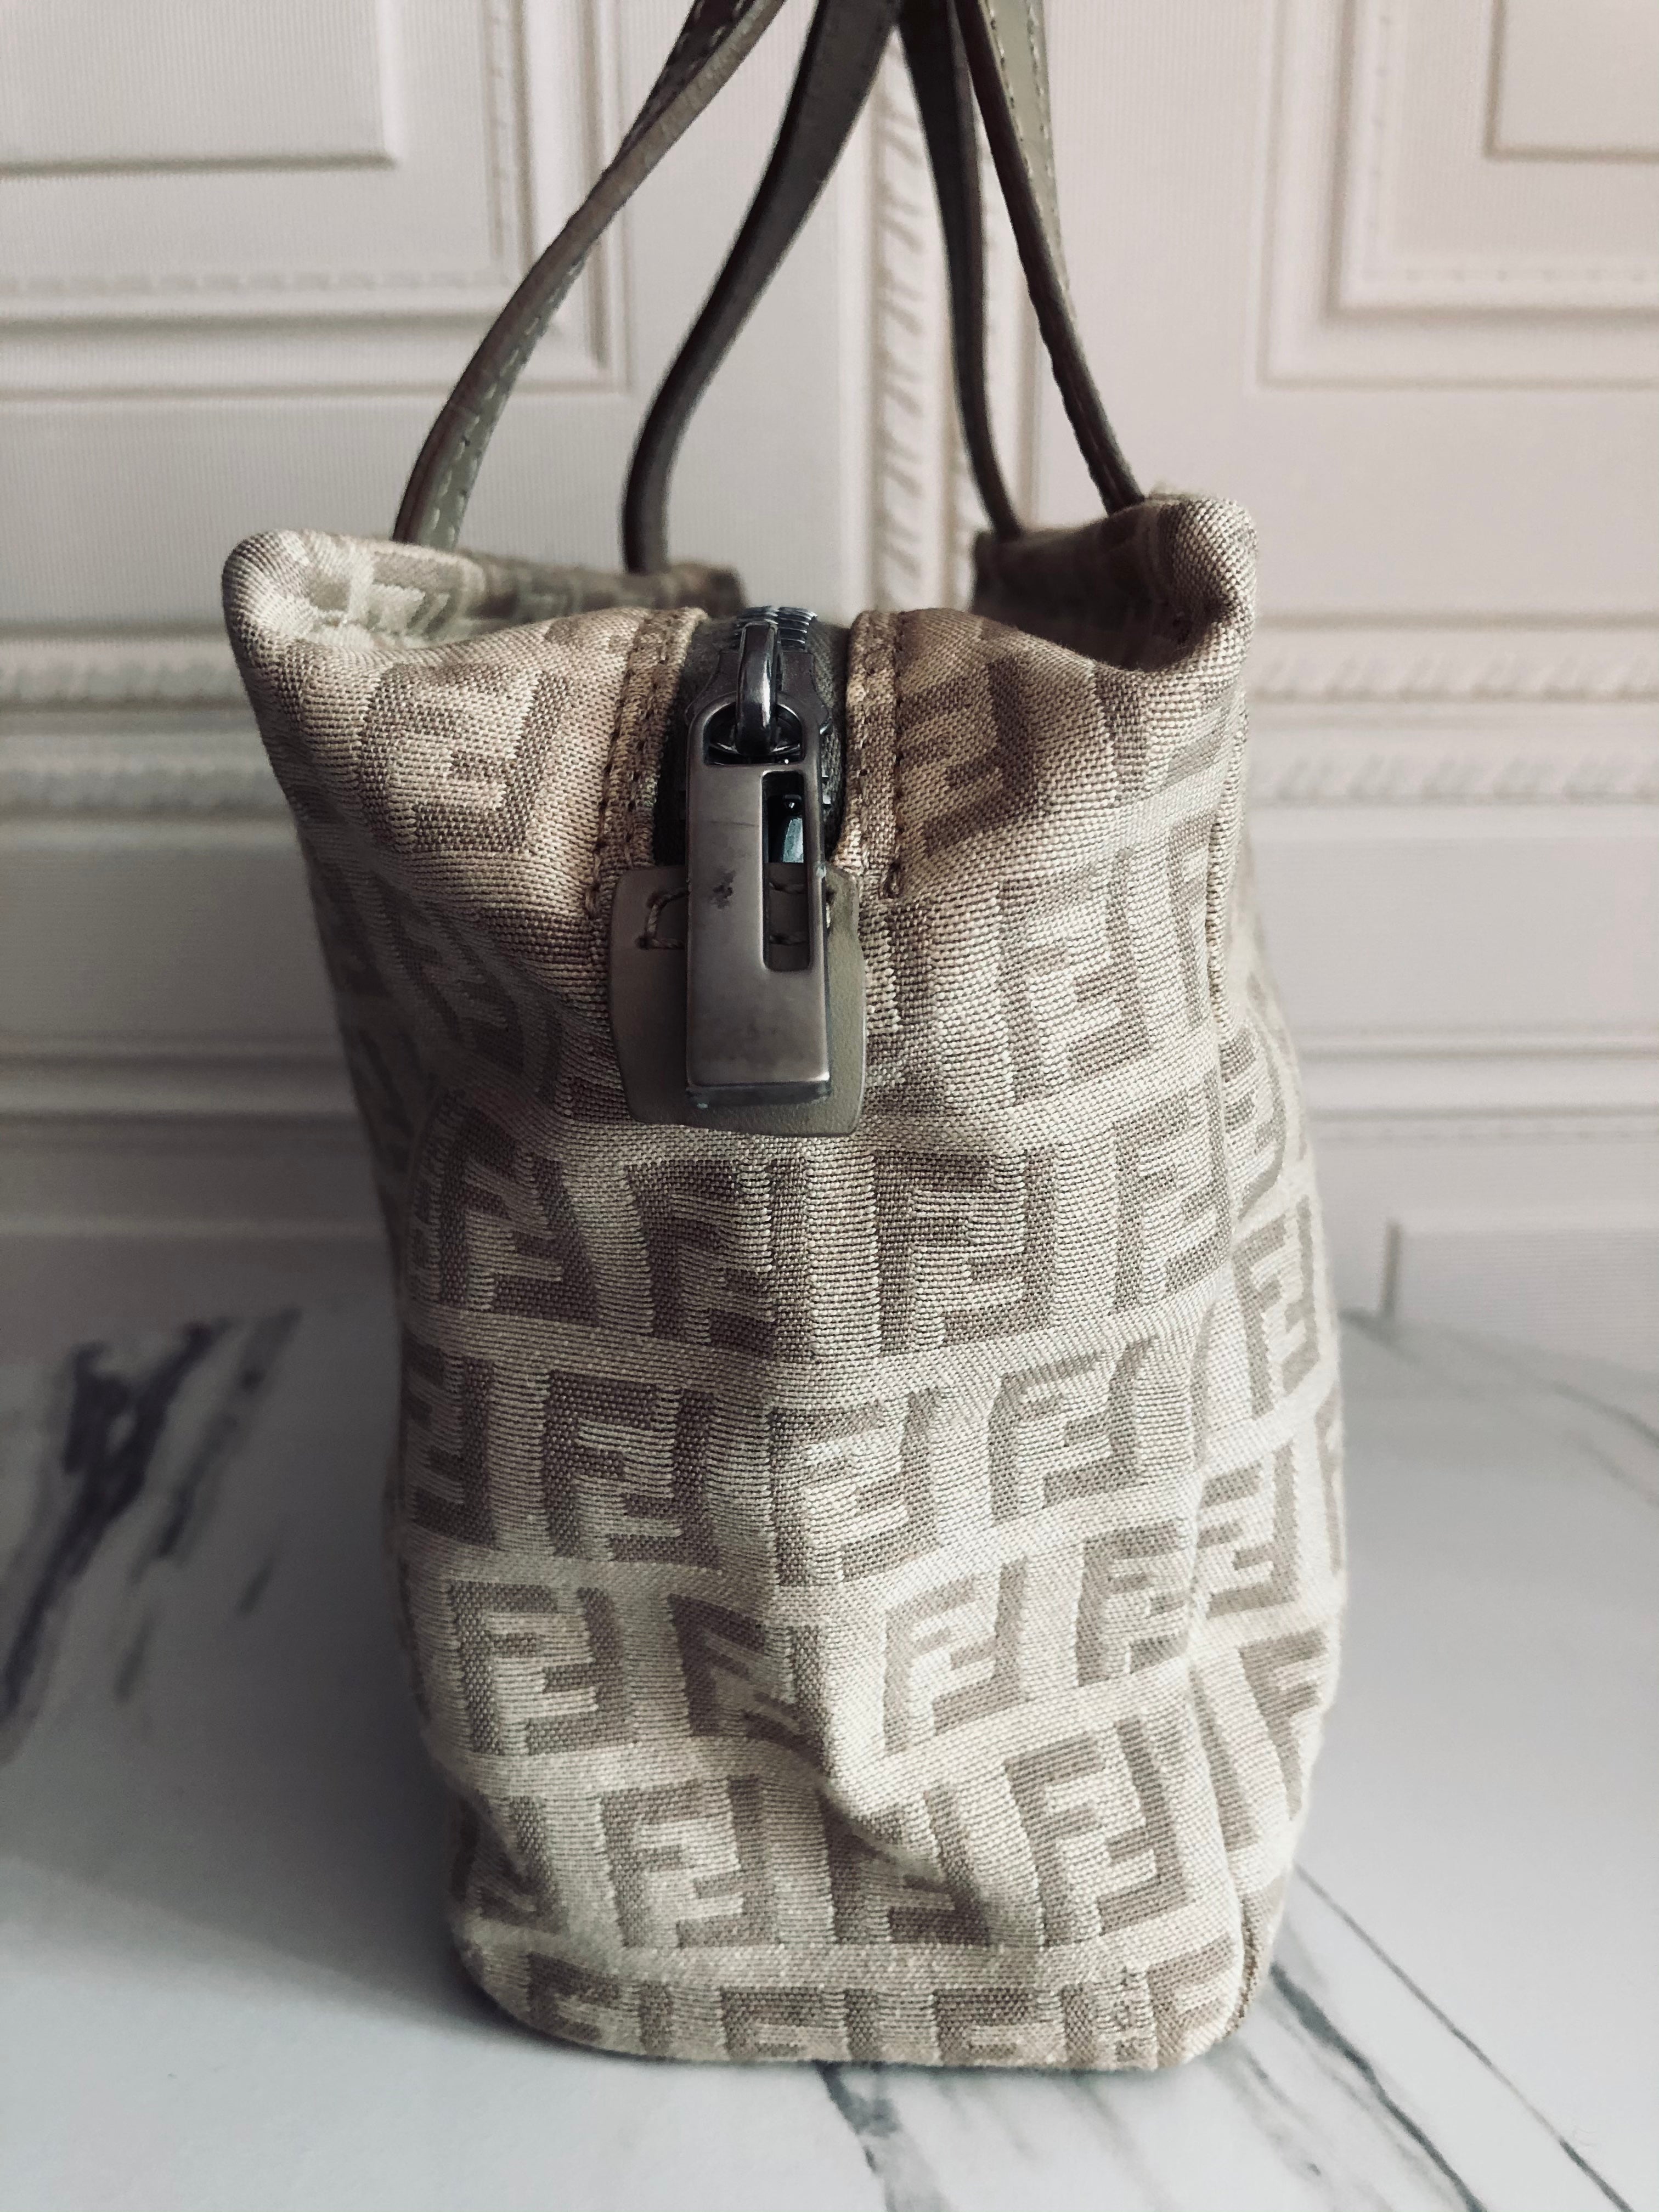 Vintage Zucchino Fendi Tote Canvas Bag with Pouch